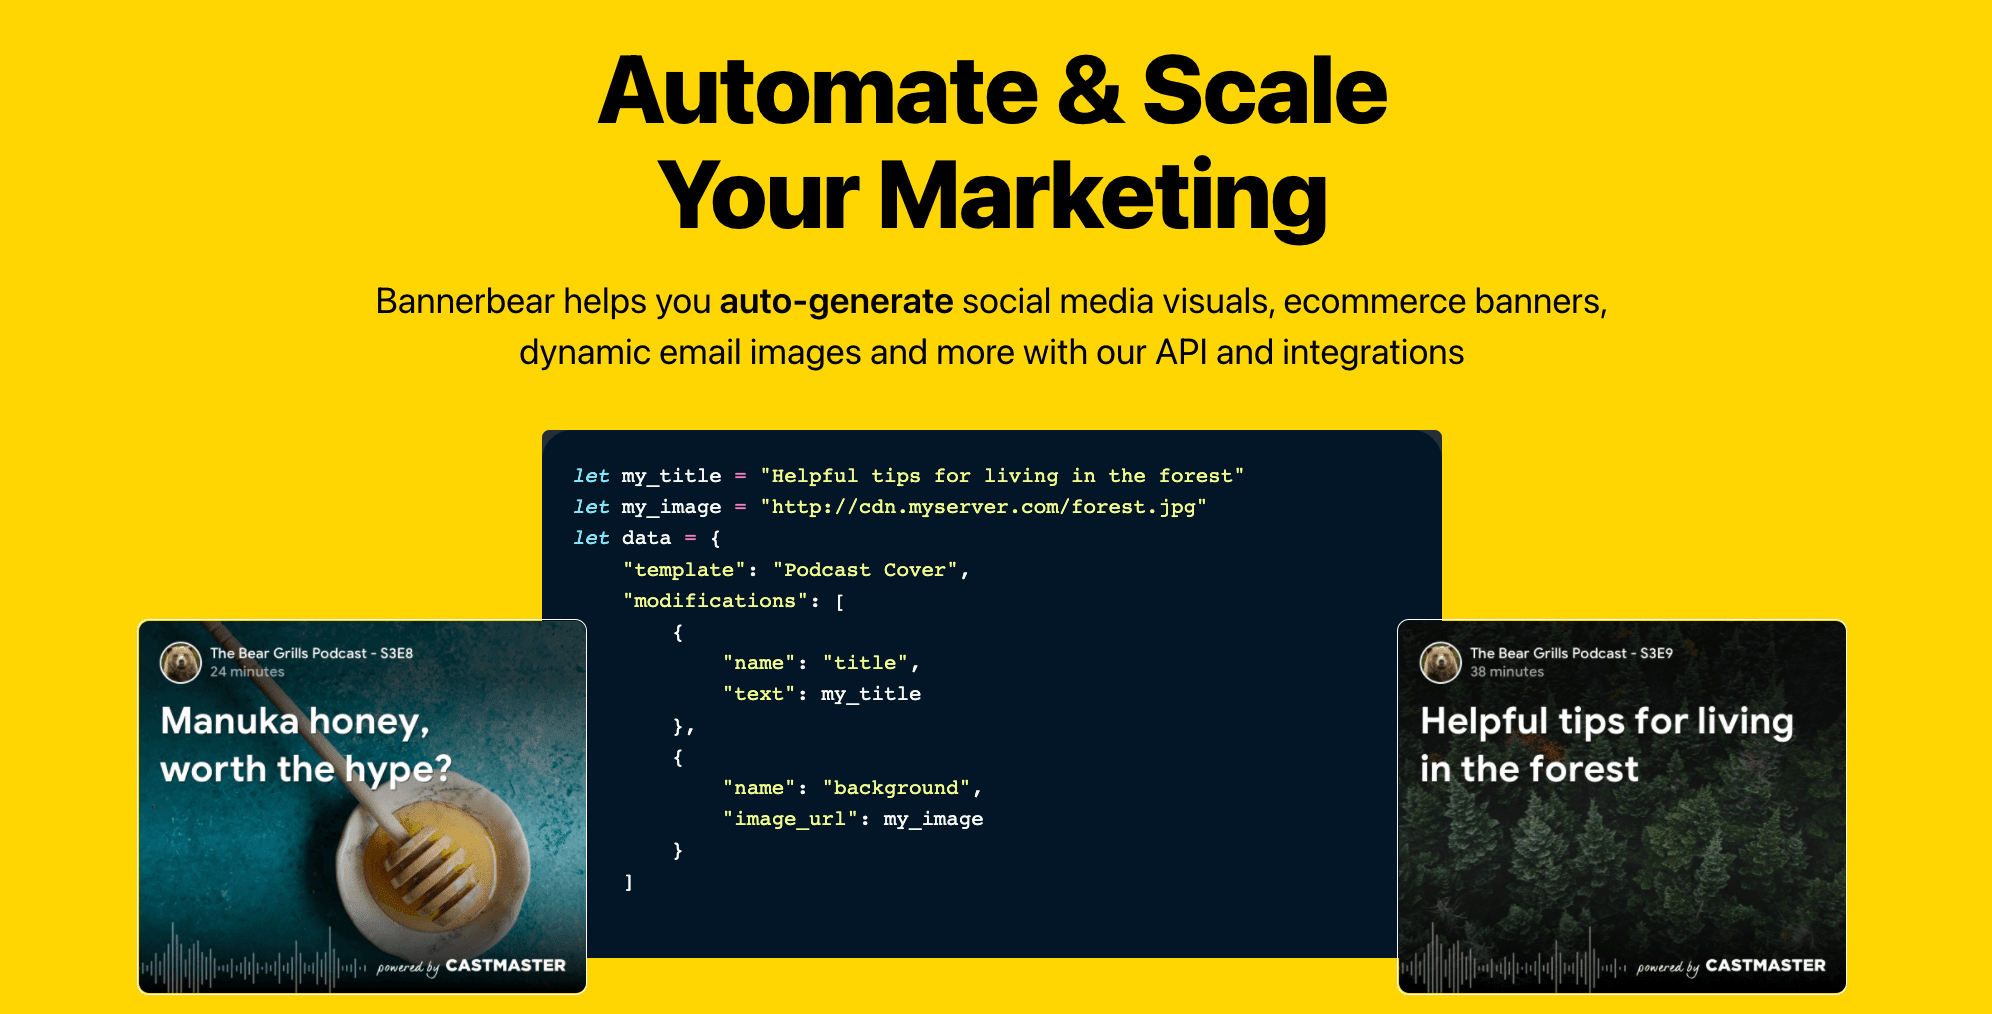 Bannerbear automation and scale marketing product